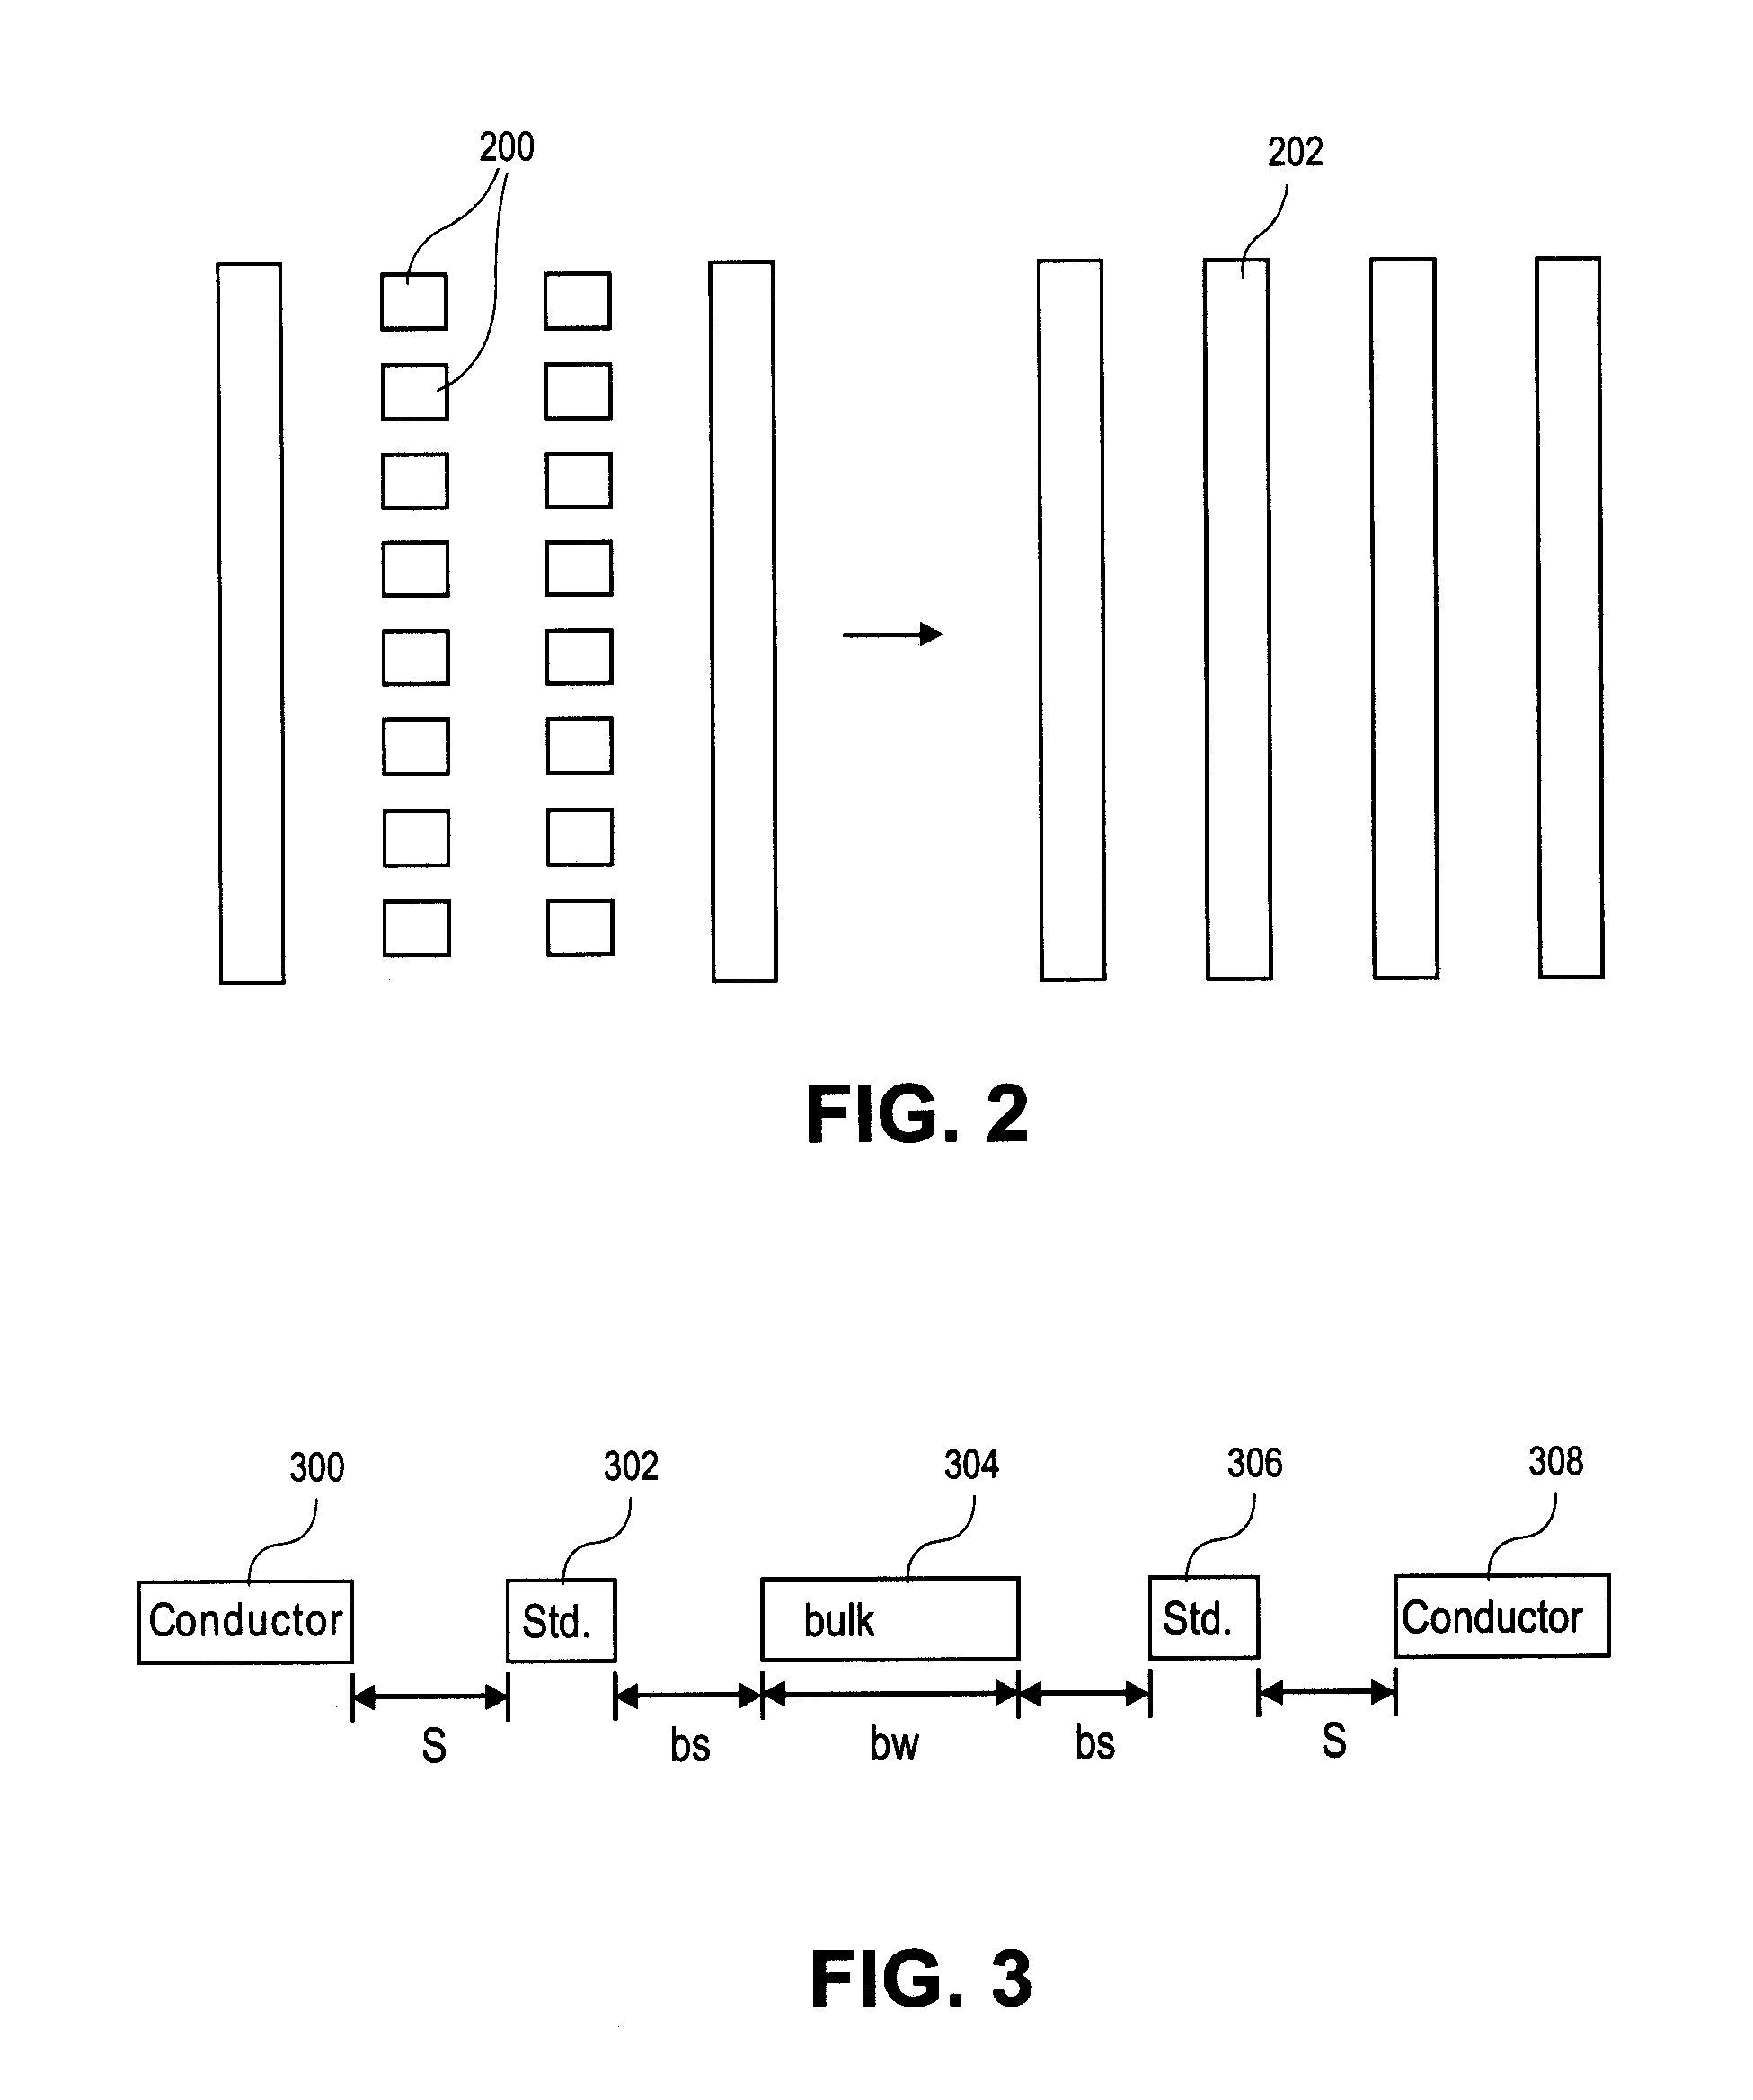 Extraction and reduction of capacitor elements using matrix operations